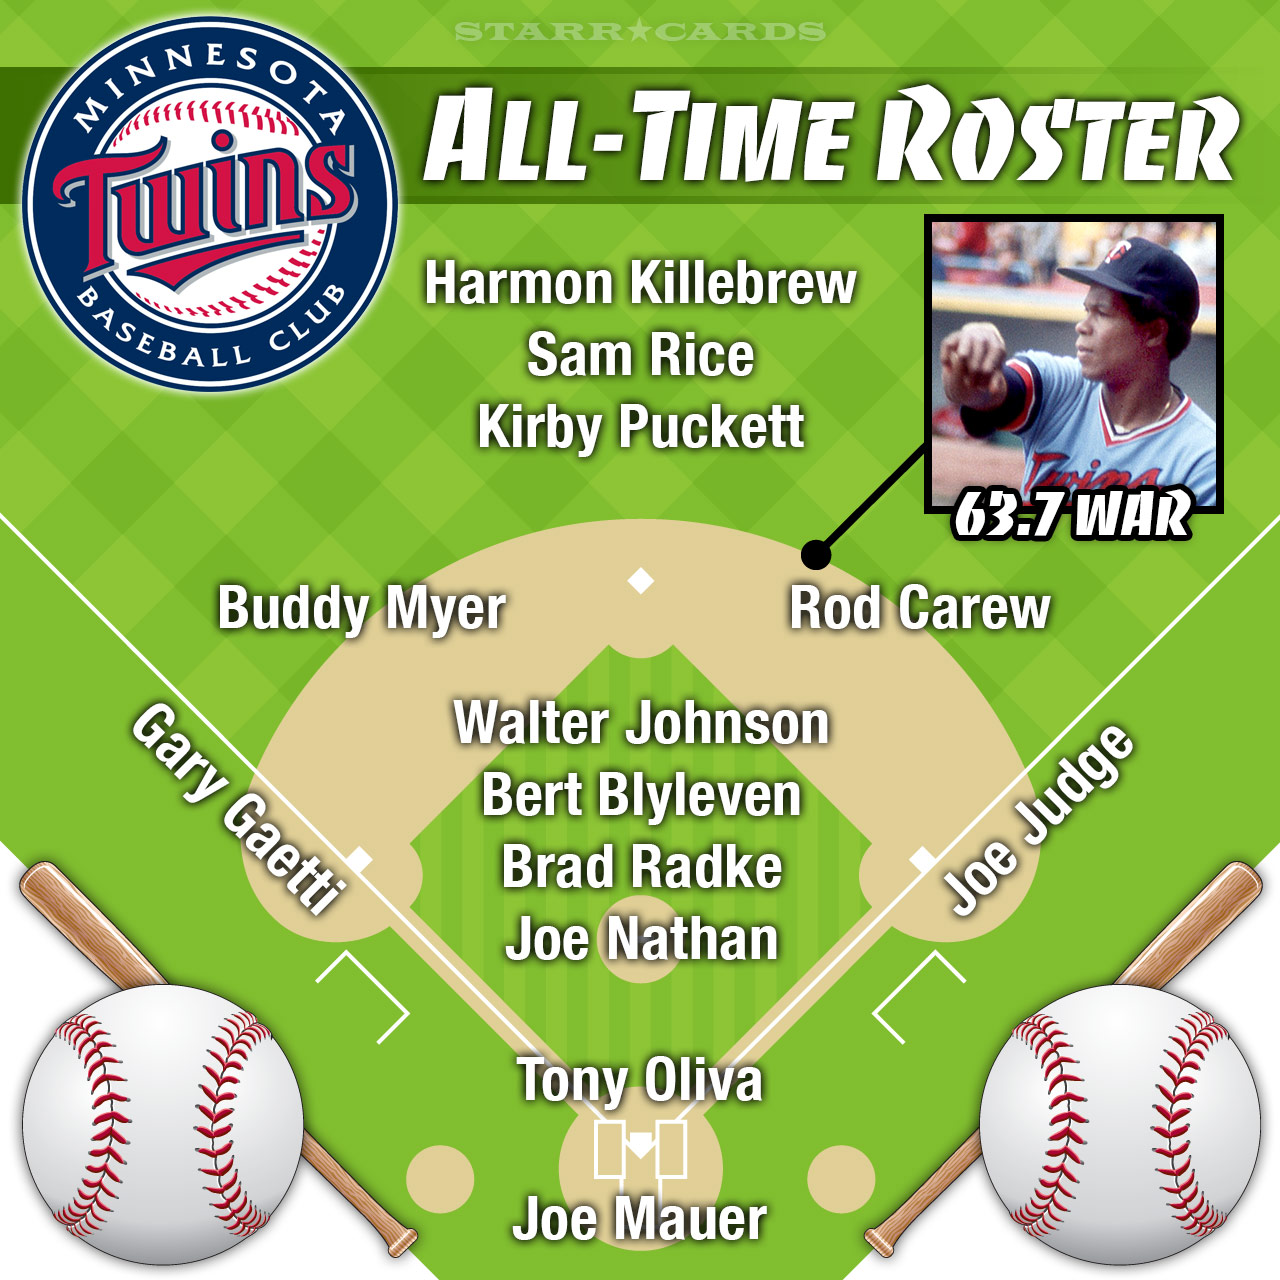 Rod Carew headlines Minnesota Twins all-time roster by WAR